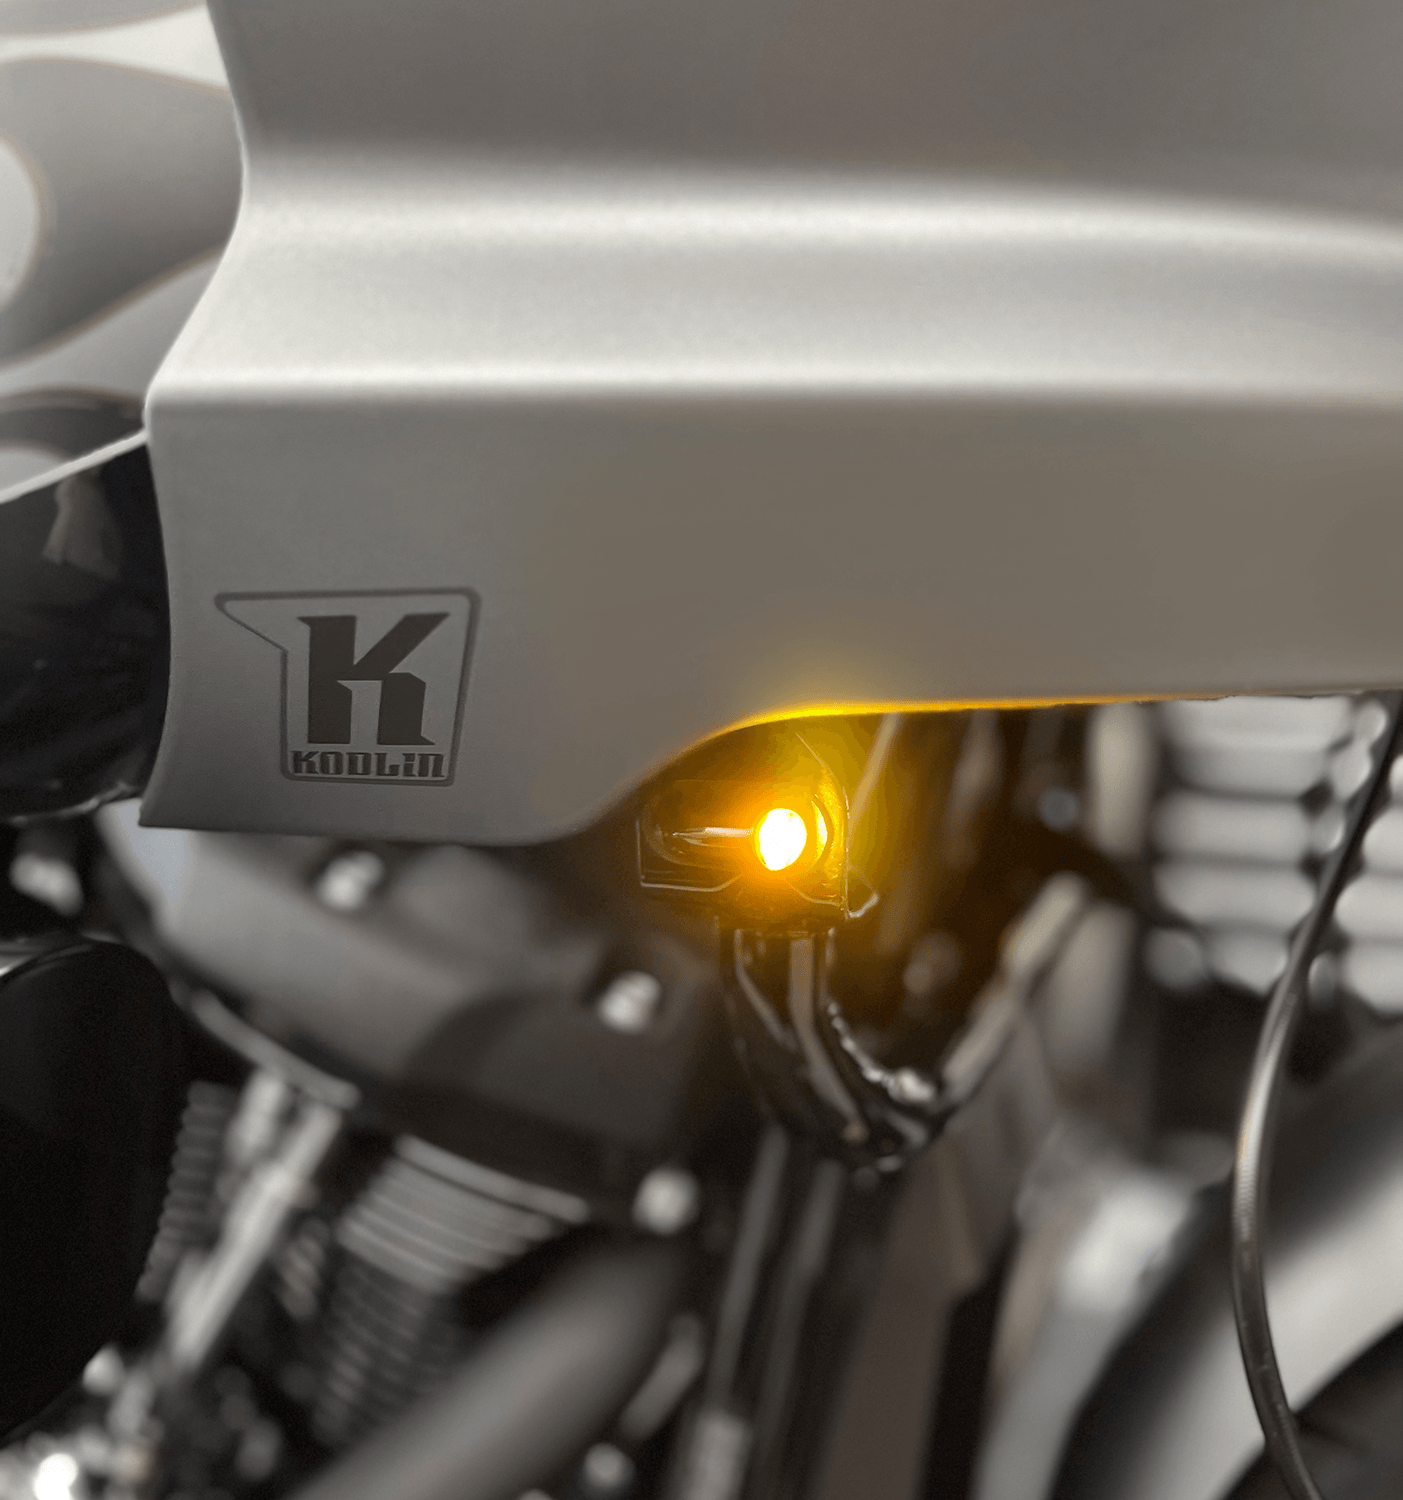 KODLIN-Neowise Bullet Smooth 2-1 LED Turn Signal / '22 Lowrider-Turn Signals-MetalCore Harley Supply